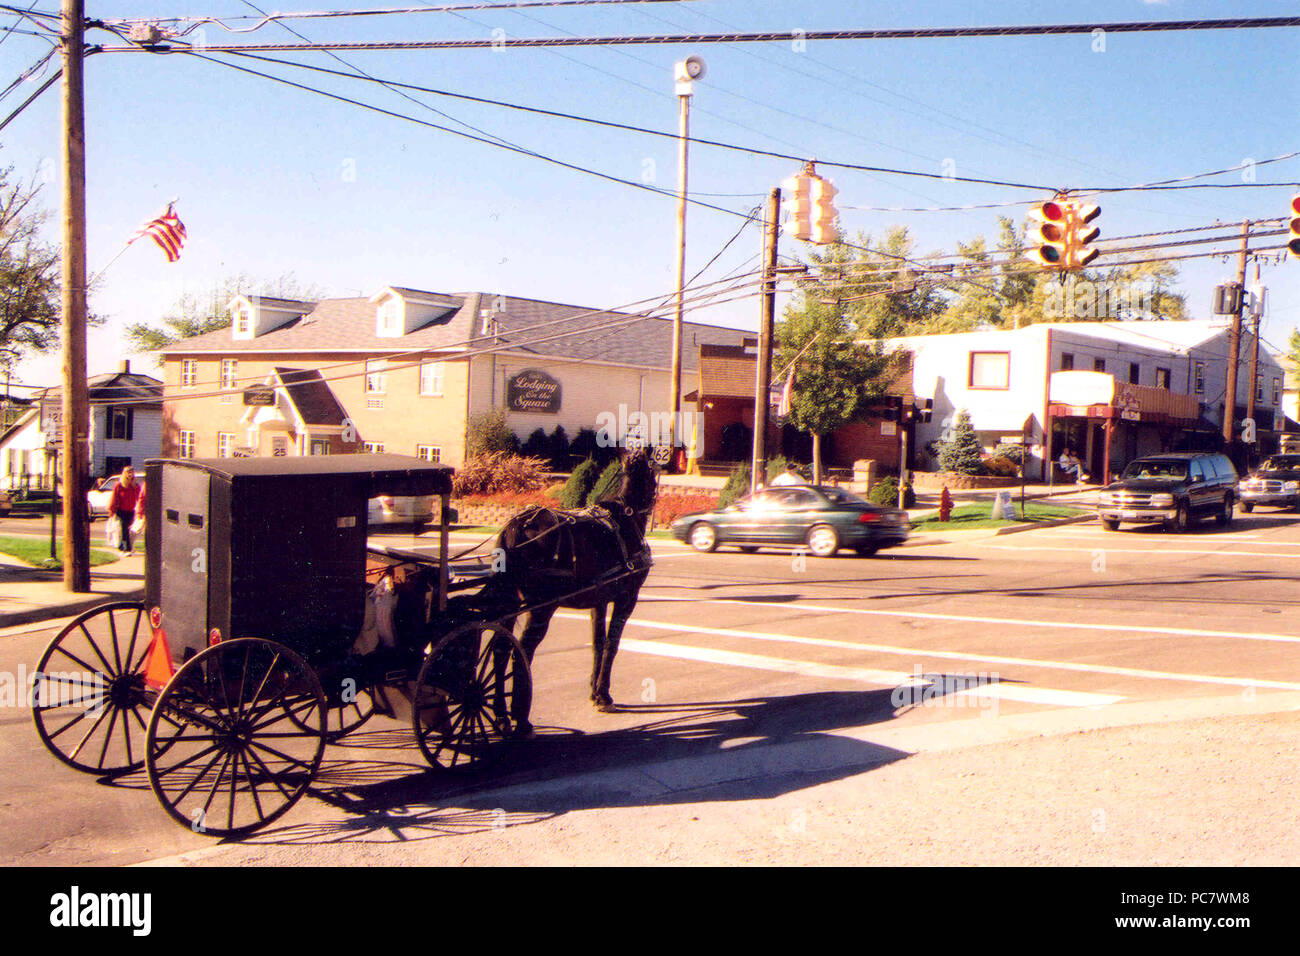 ca. 2005 - A horse-drawn carriage in Berlin, OH waits at a stoplight for its turn to proceed. Stock Photo